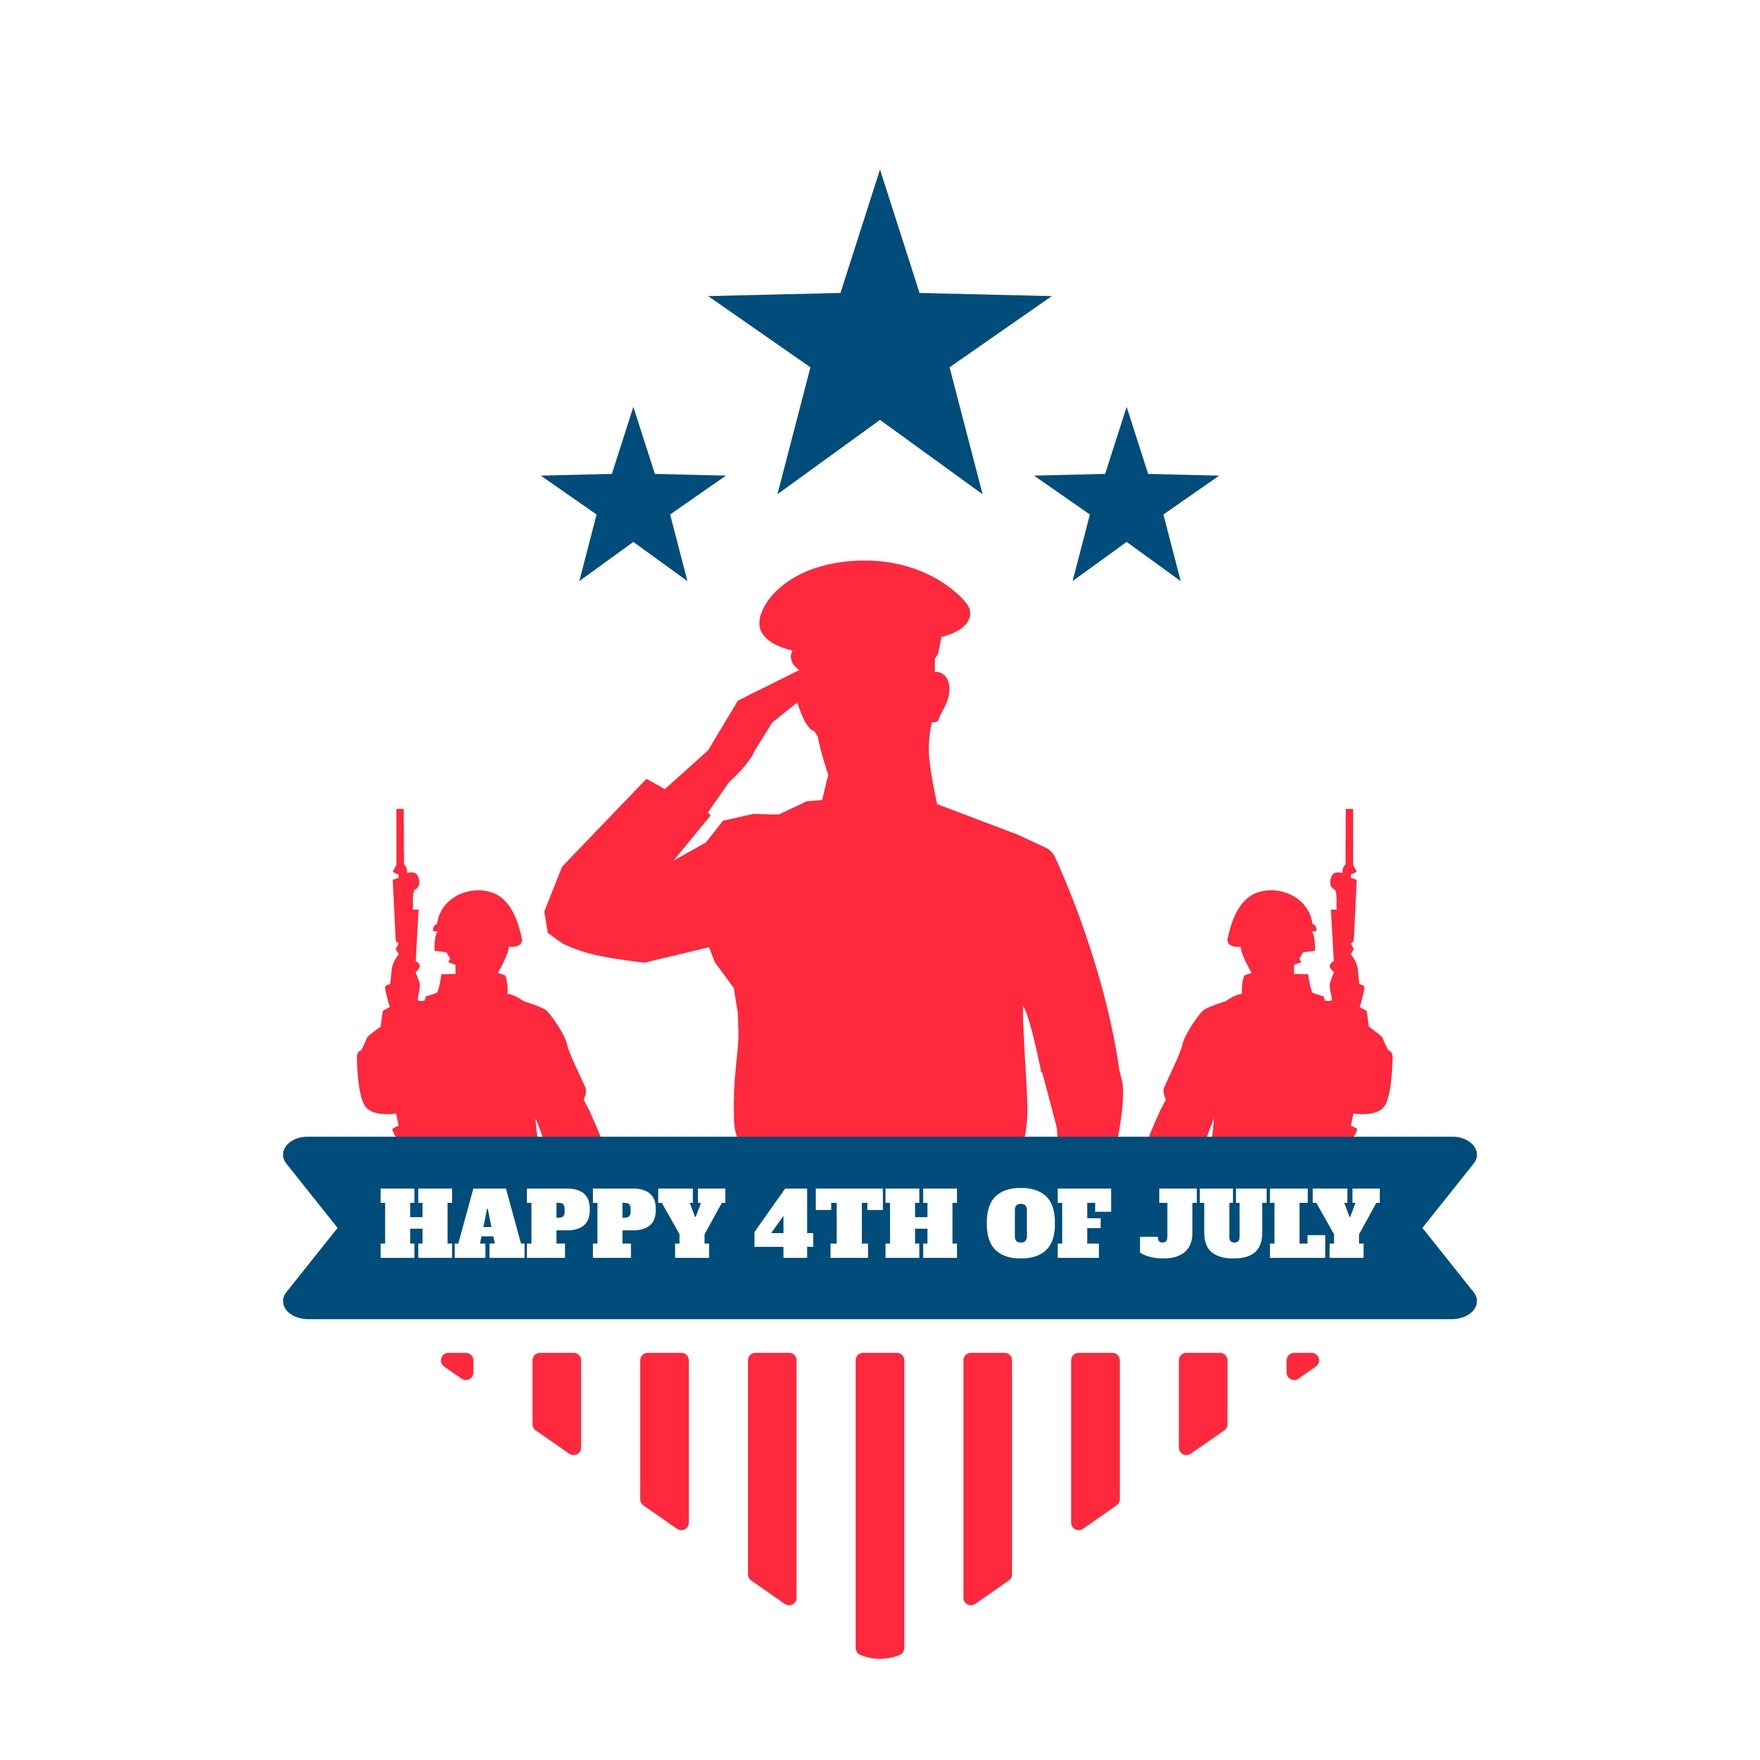 Military Happy 4th Of July Gif in Illustrator, EPS, SVG, JPG, GIF, PNG, After Effects